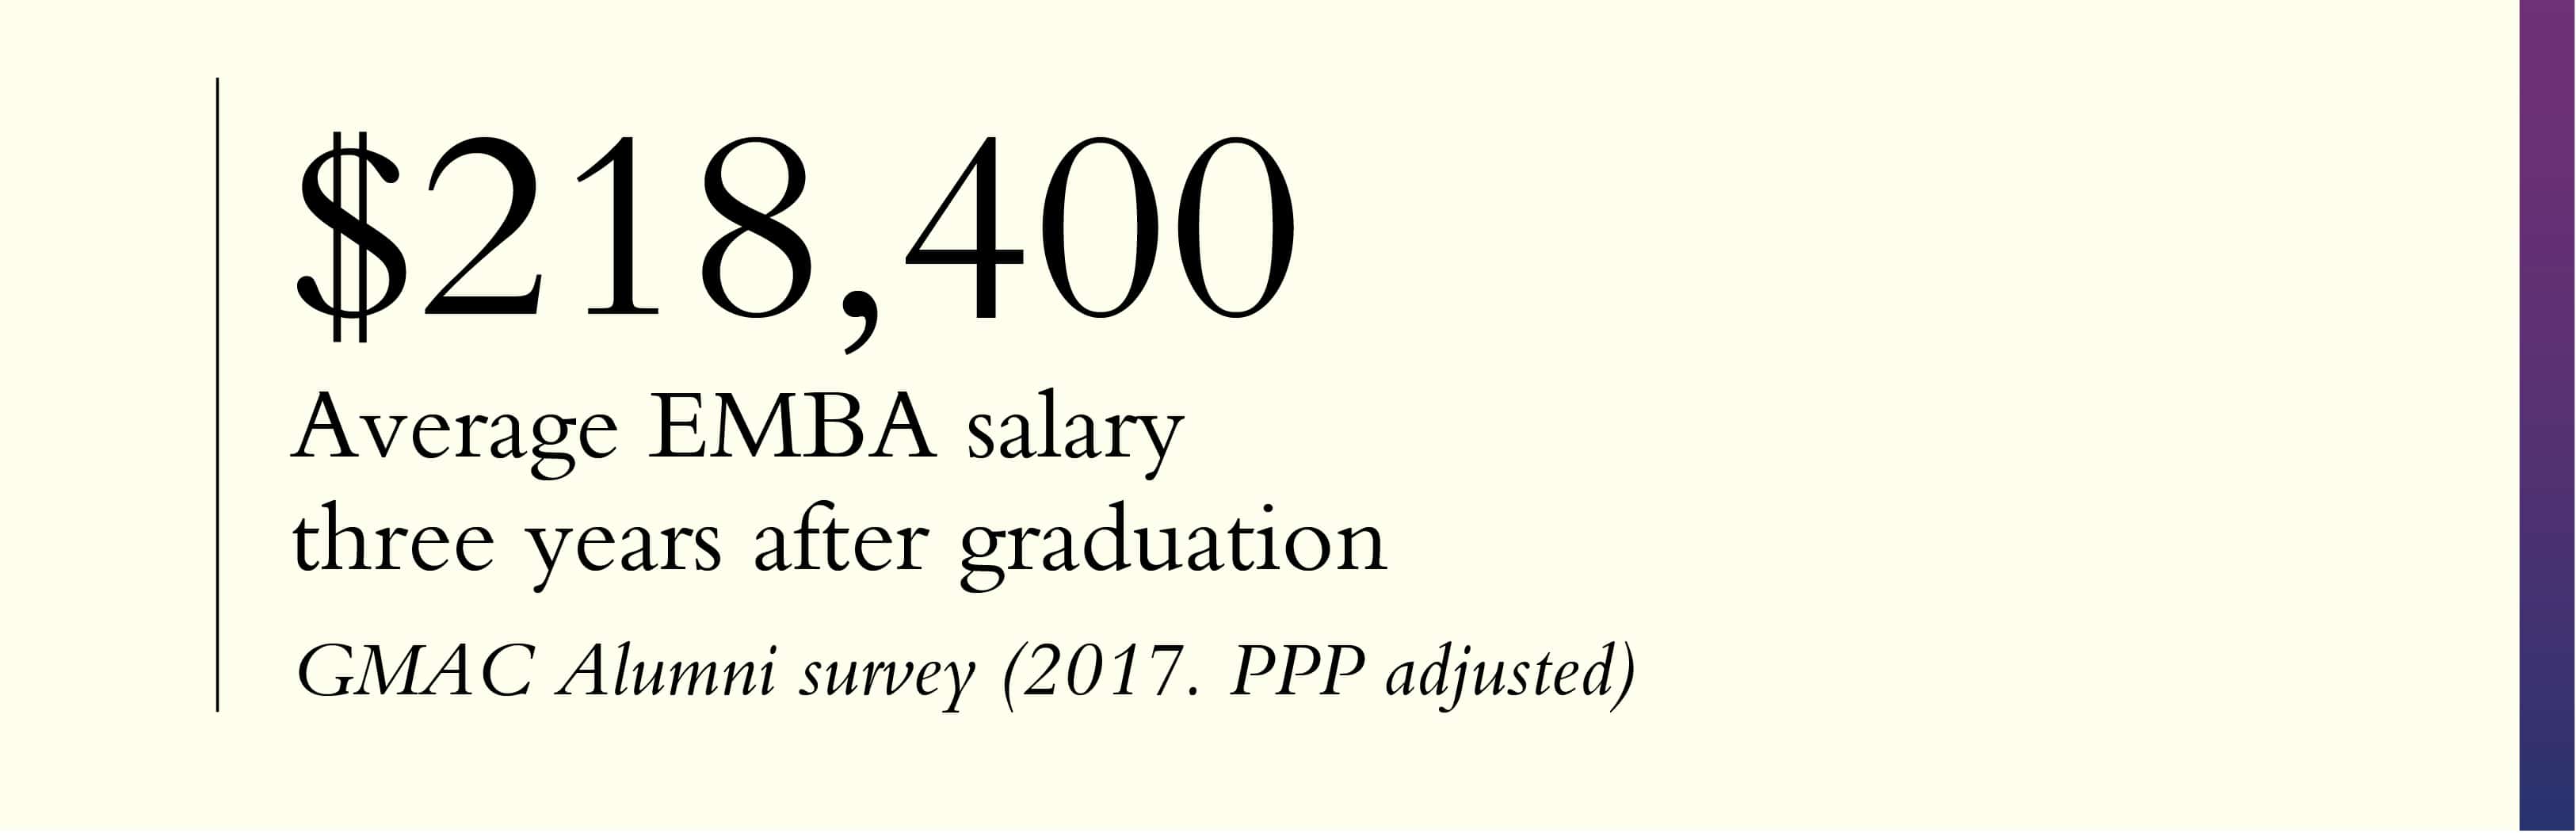 ROI of an EMBA 3 year salary